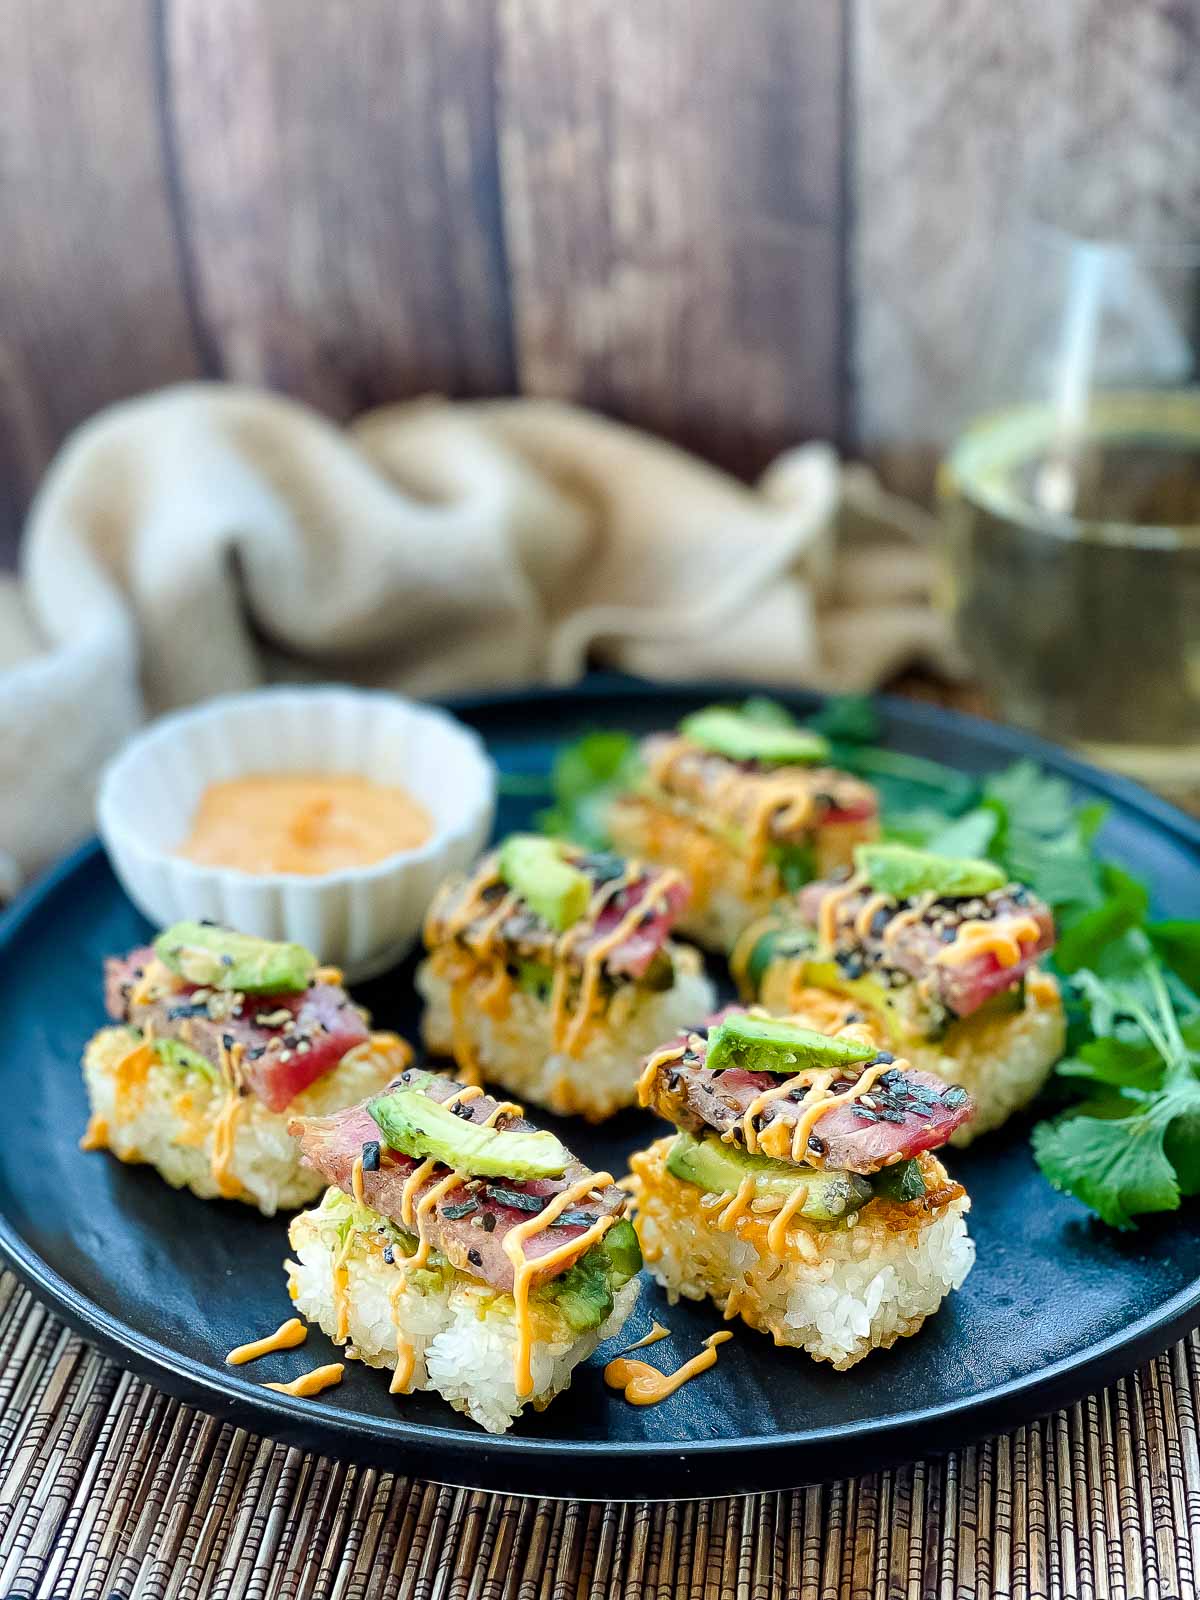 Spicy tuna crispy rice bites topped with avocado and tuna sushi drizzled with a sriracha aioli placed on top of a black plate with a small white bowl of aioli on the side and a napkin and glass of white wine in the background.